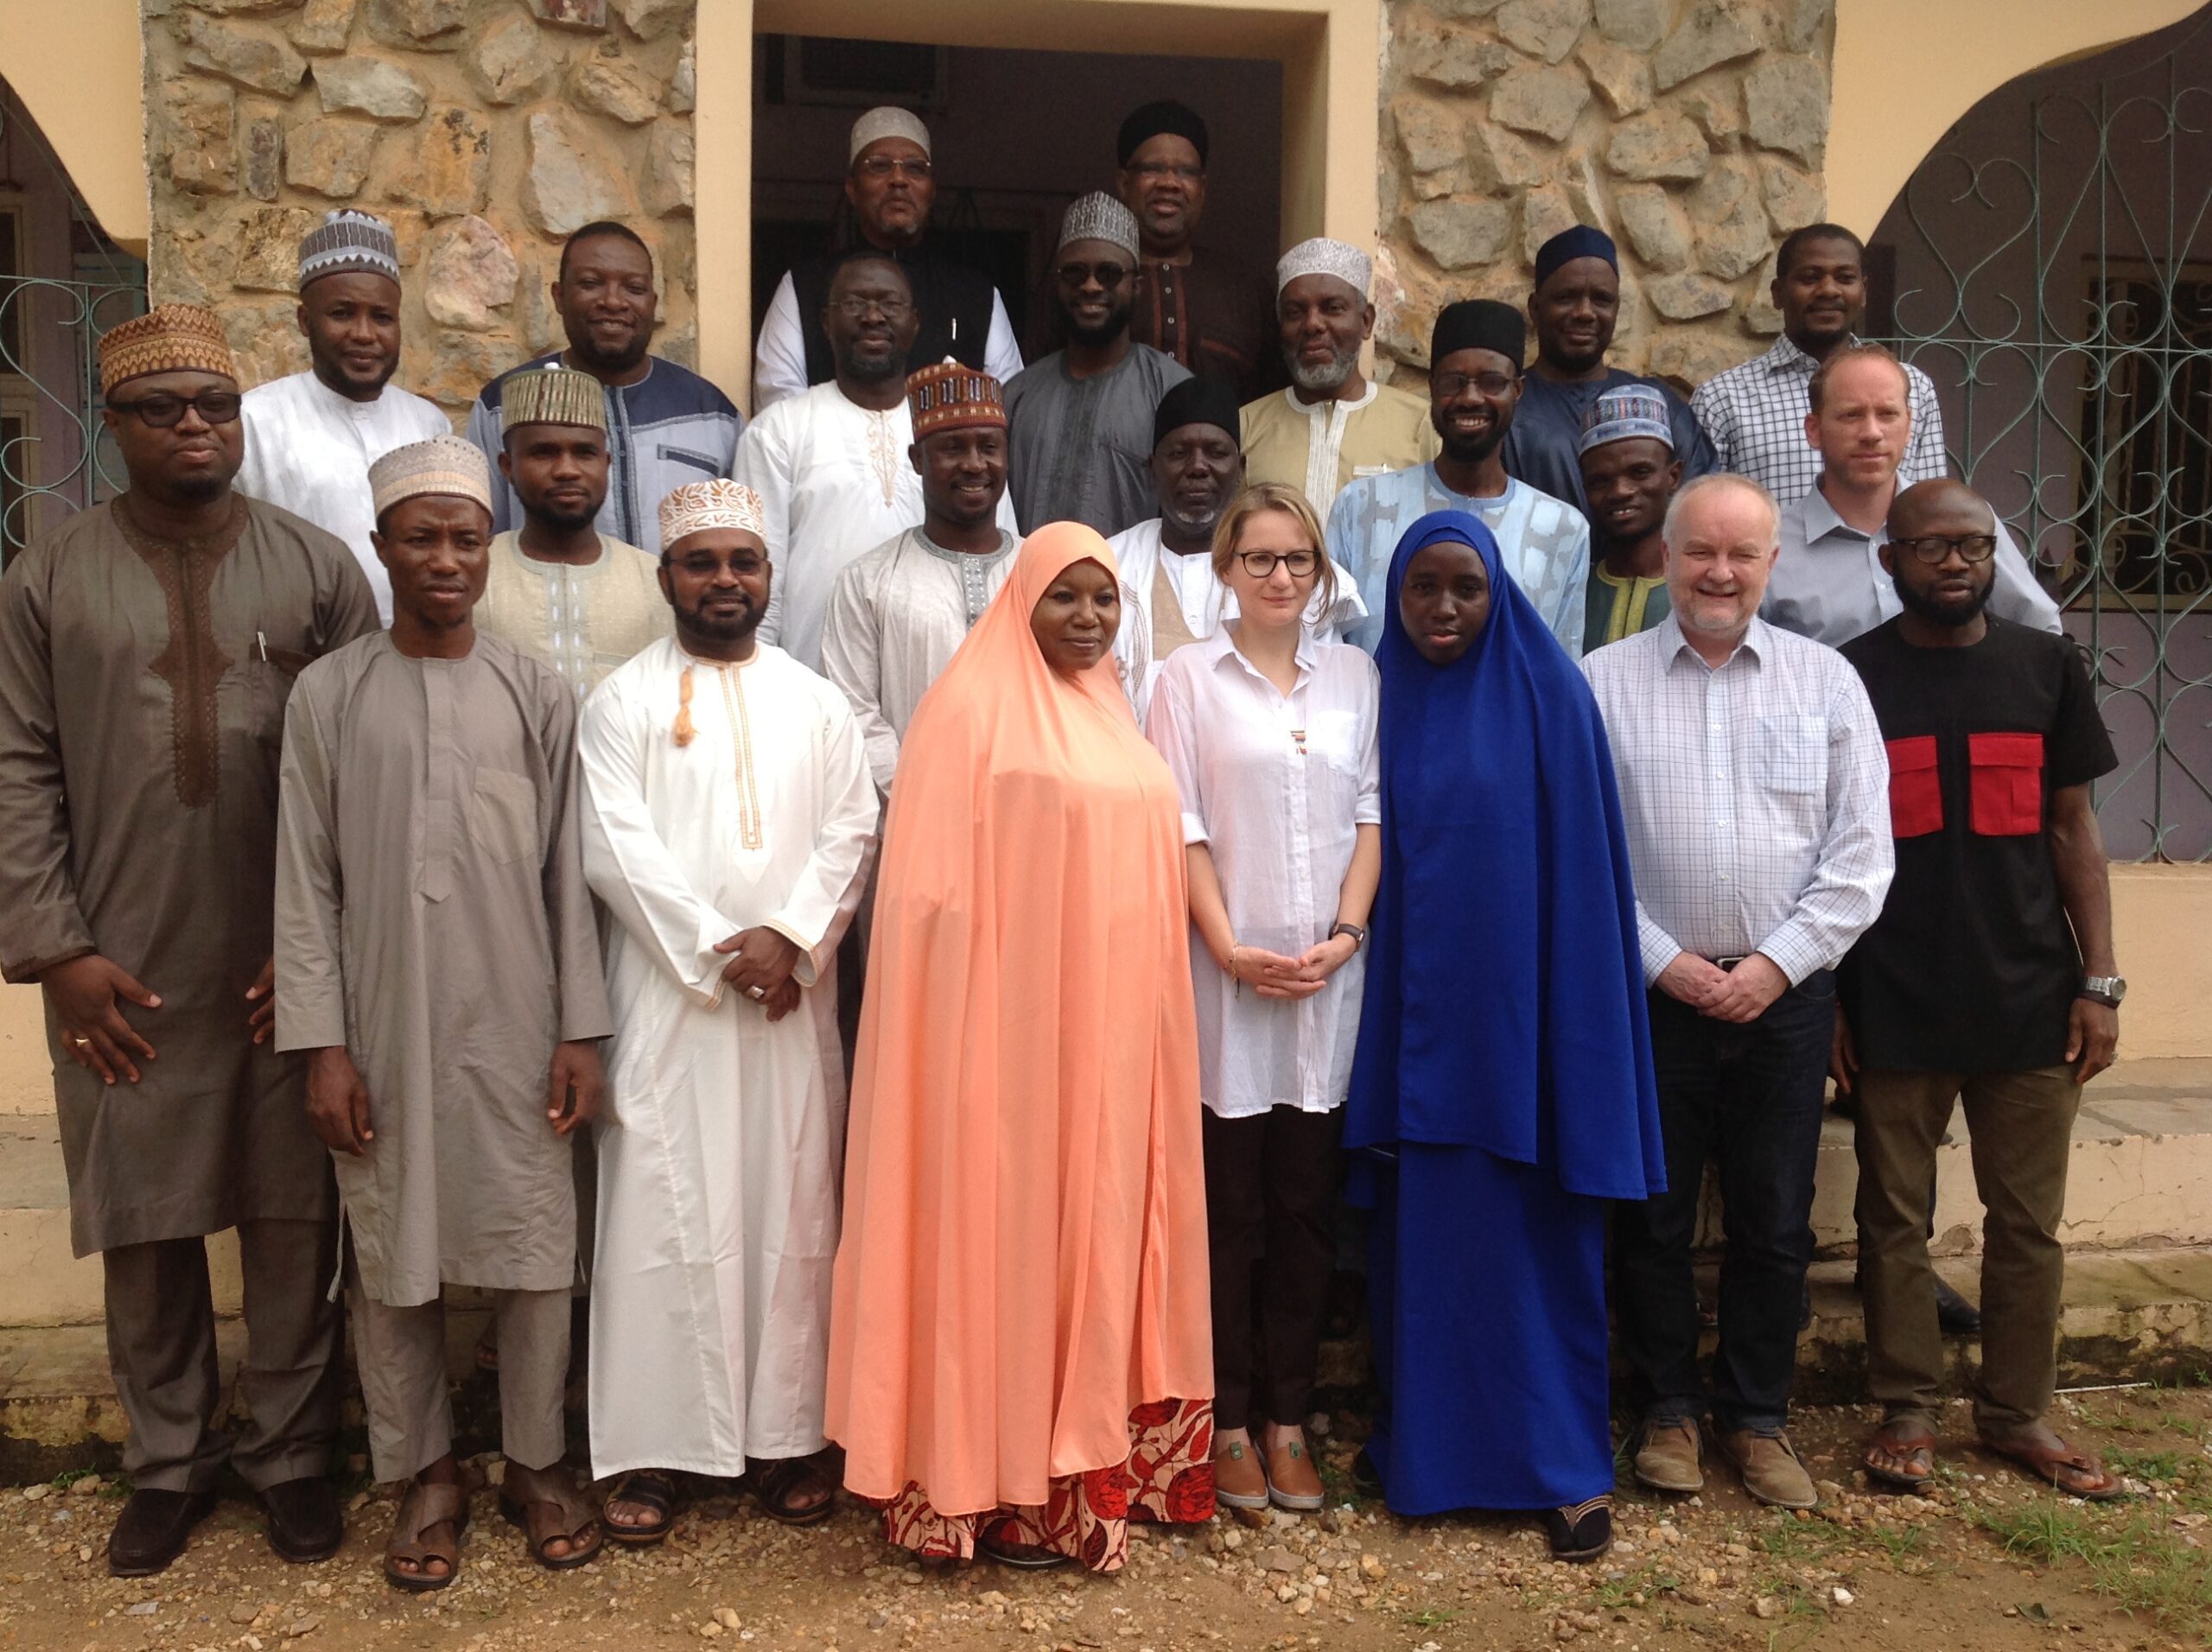 Nigeria Reviewing Contents and Approaches in Responding to Extremists Narratives1